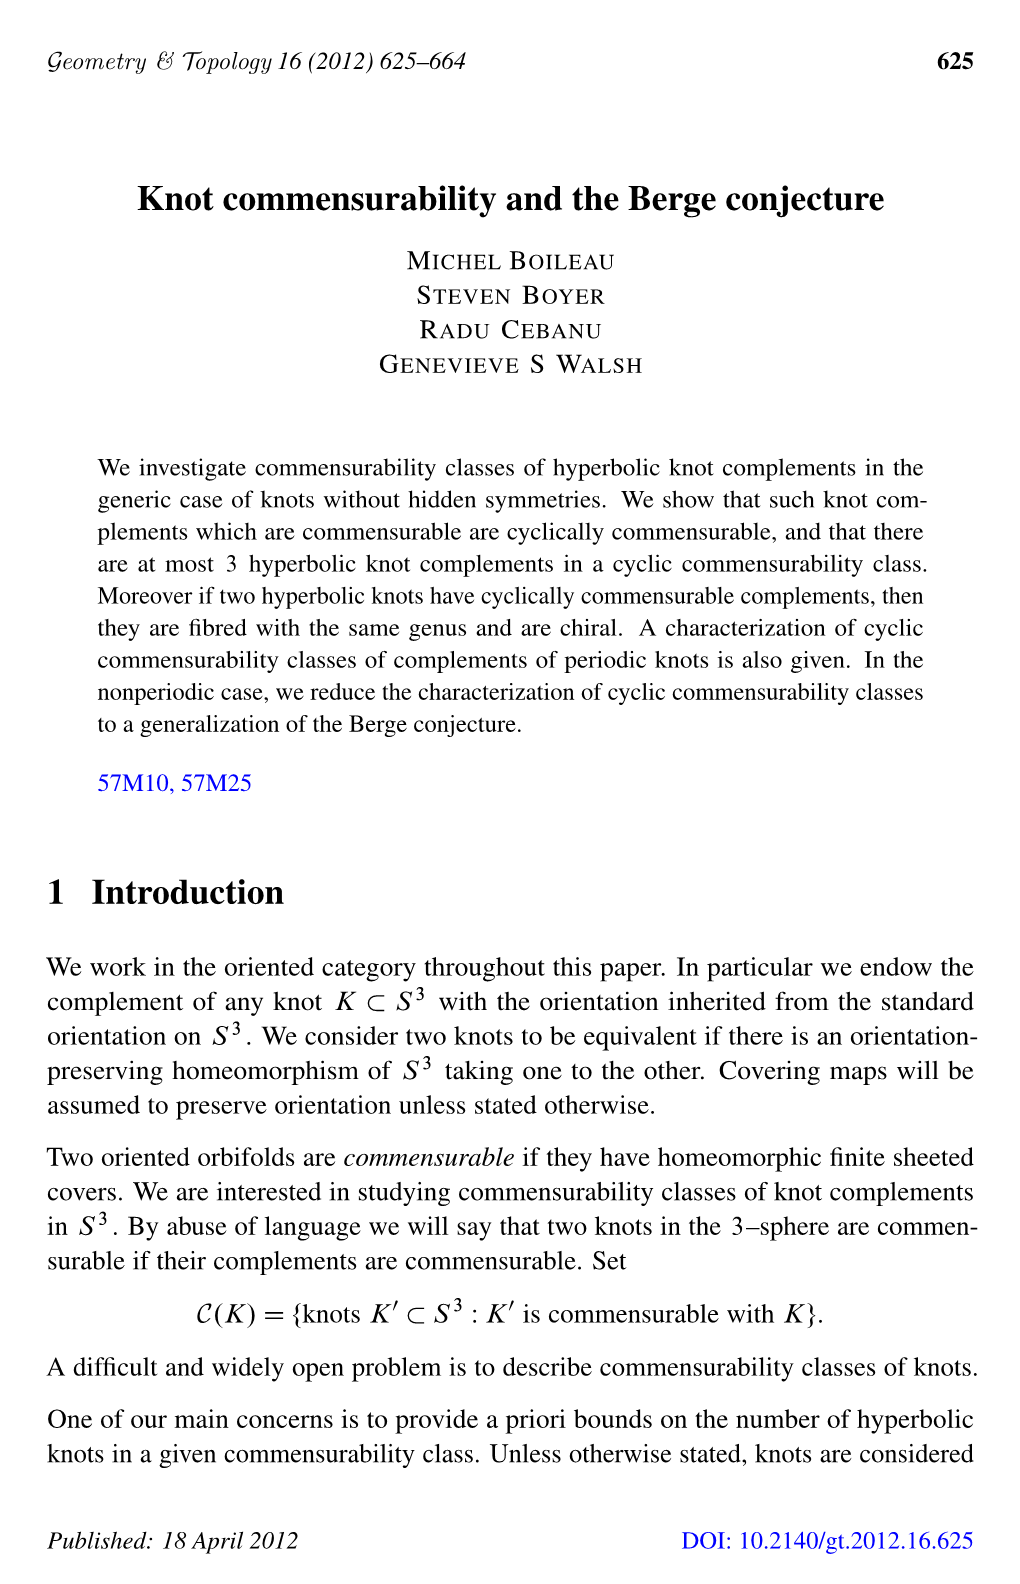 Knot Commensurability and the Berge Conjecture